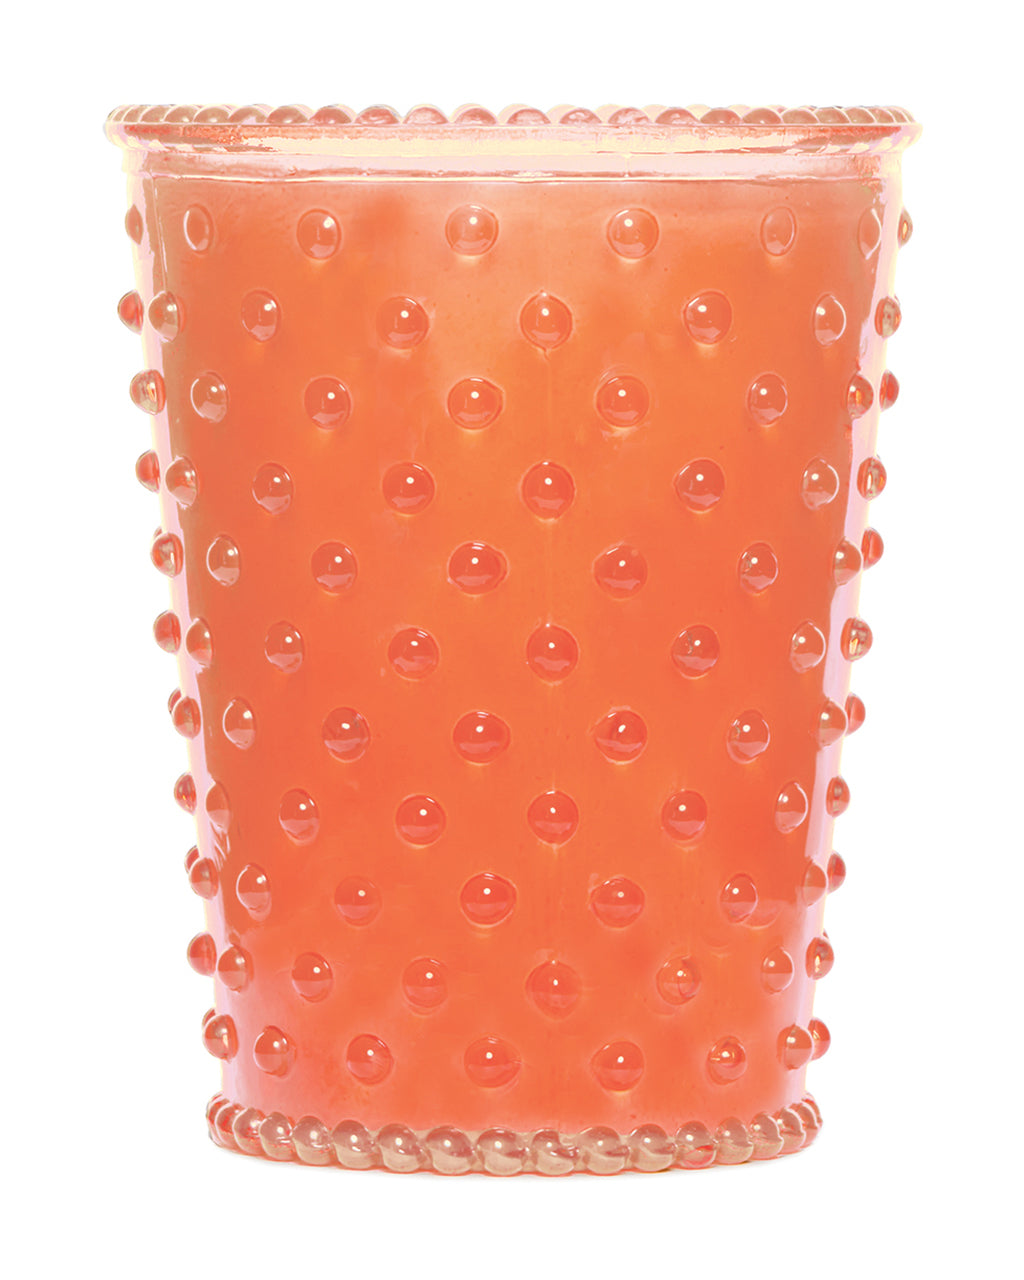 A vibrant orange Simpatico NO. 71 GUAVA Hobnail Glass Candle with a dotted hobnail texture pattern all around, isolated on a white background.